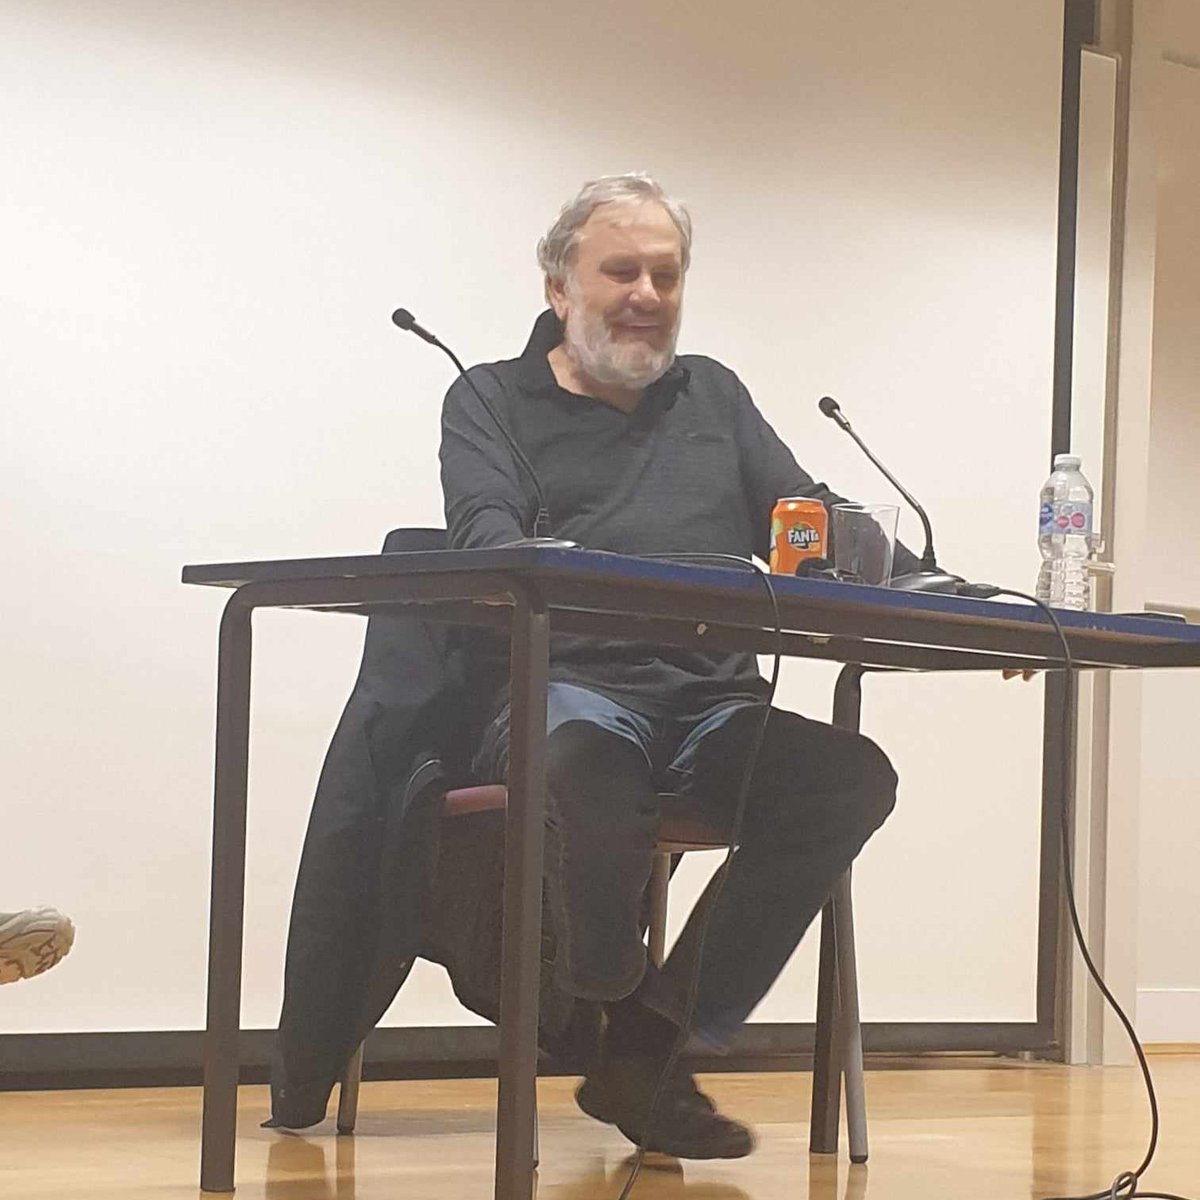 Now LIVE 🎥 @bbkinstitutes 💥DAY 1 of Slavoj Zizek's masterclass 'Welcome to the Age of Indifference' 💥Tickets available to watch now or attend DAY 2 on 21st March, 2-4pm 👉bit.ly/49Z9K5C